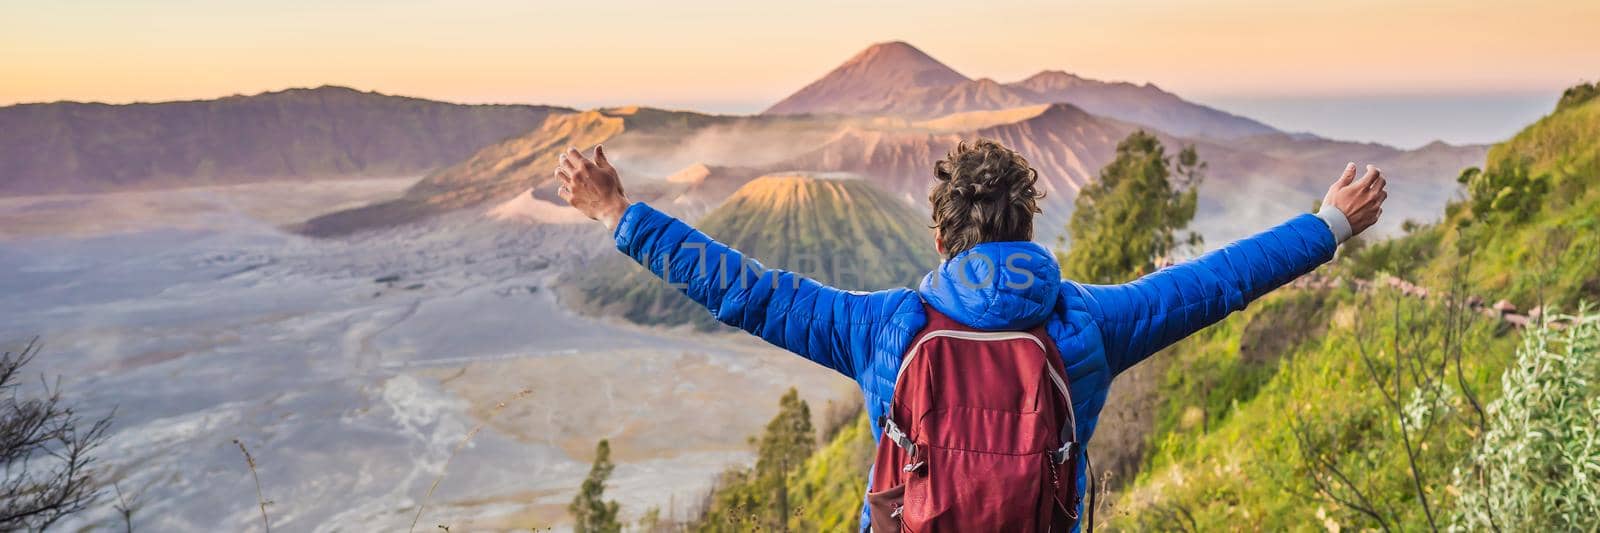 BANNER, LONG FORMAT Young man meets the sunrise at the Bromo Tengger Semeru National Park on the Java Island, Indonesia. He enjoys magnificent view on the Bromo or Gunung Bromo on Indonesian, Semeru and other volcanoes located inside of the Sea of Sand within the Tengger Caldera. One of the most famous volcanic objects in the world. Travel to Indonesia concept.